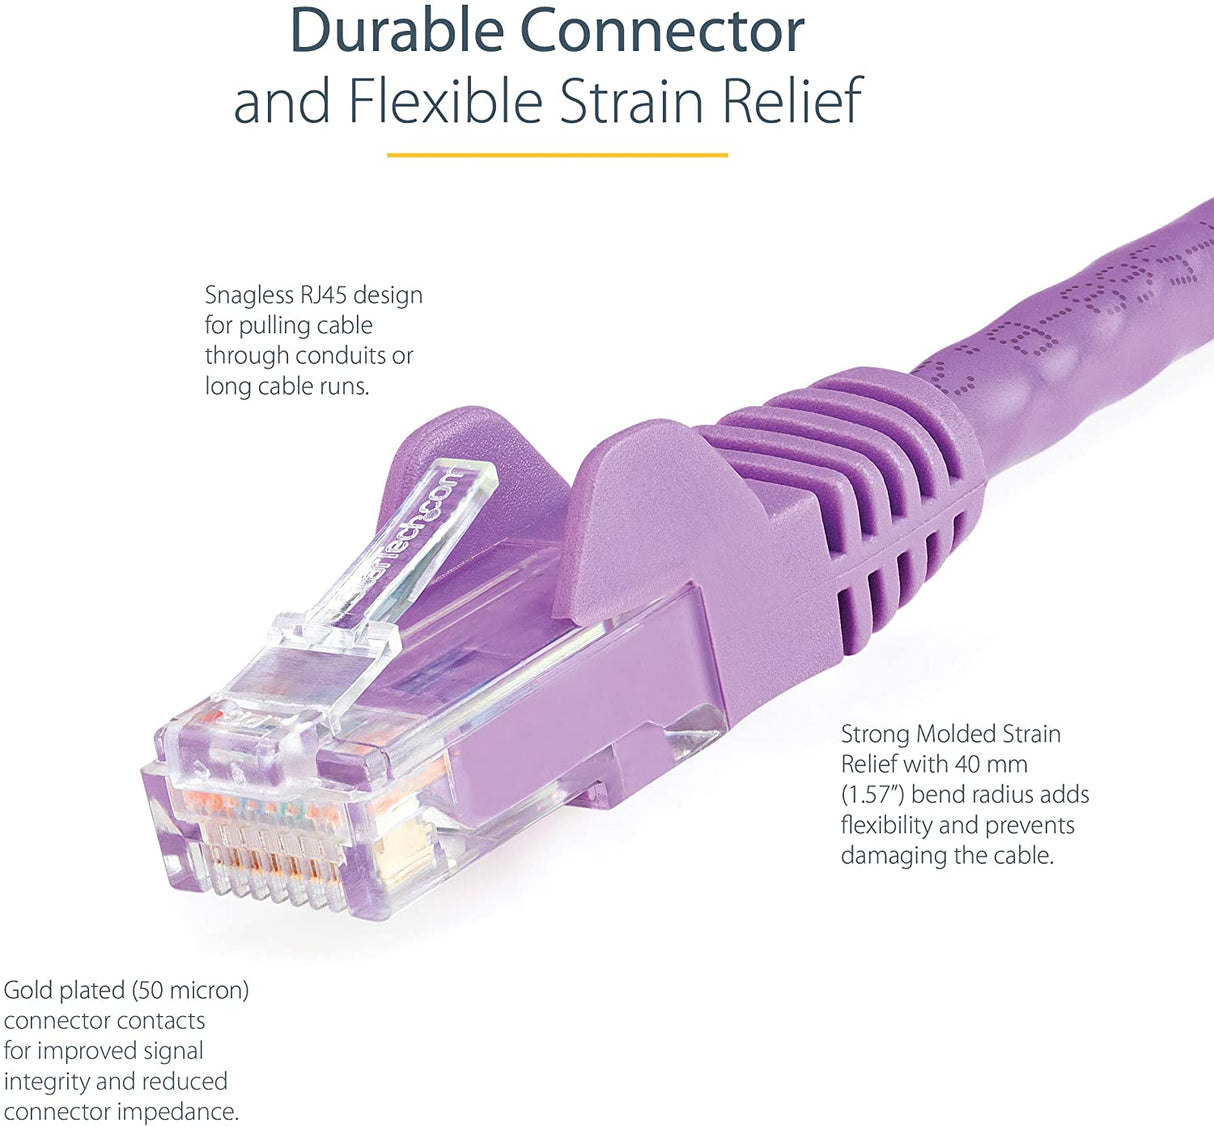 StarTech.com 5ft CAT6 Ethernet Cable - Purple CAT 6 Gigabit Ethernet Wire -650MHz 100W PoE++ RJ45 UTP Category 6 Network/Patch Cord Snagless w/Strain Relief Fluke Tested UL/TIA Certified (N6PATCH5PL) Purple 5 ft / 1.5 m 1 Pack